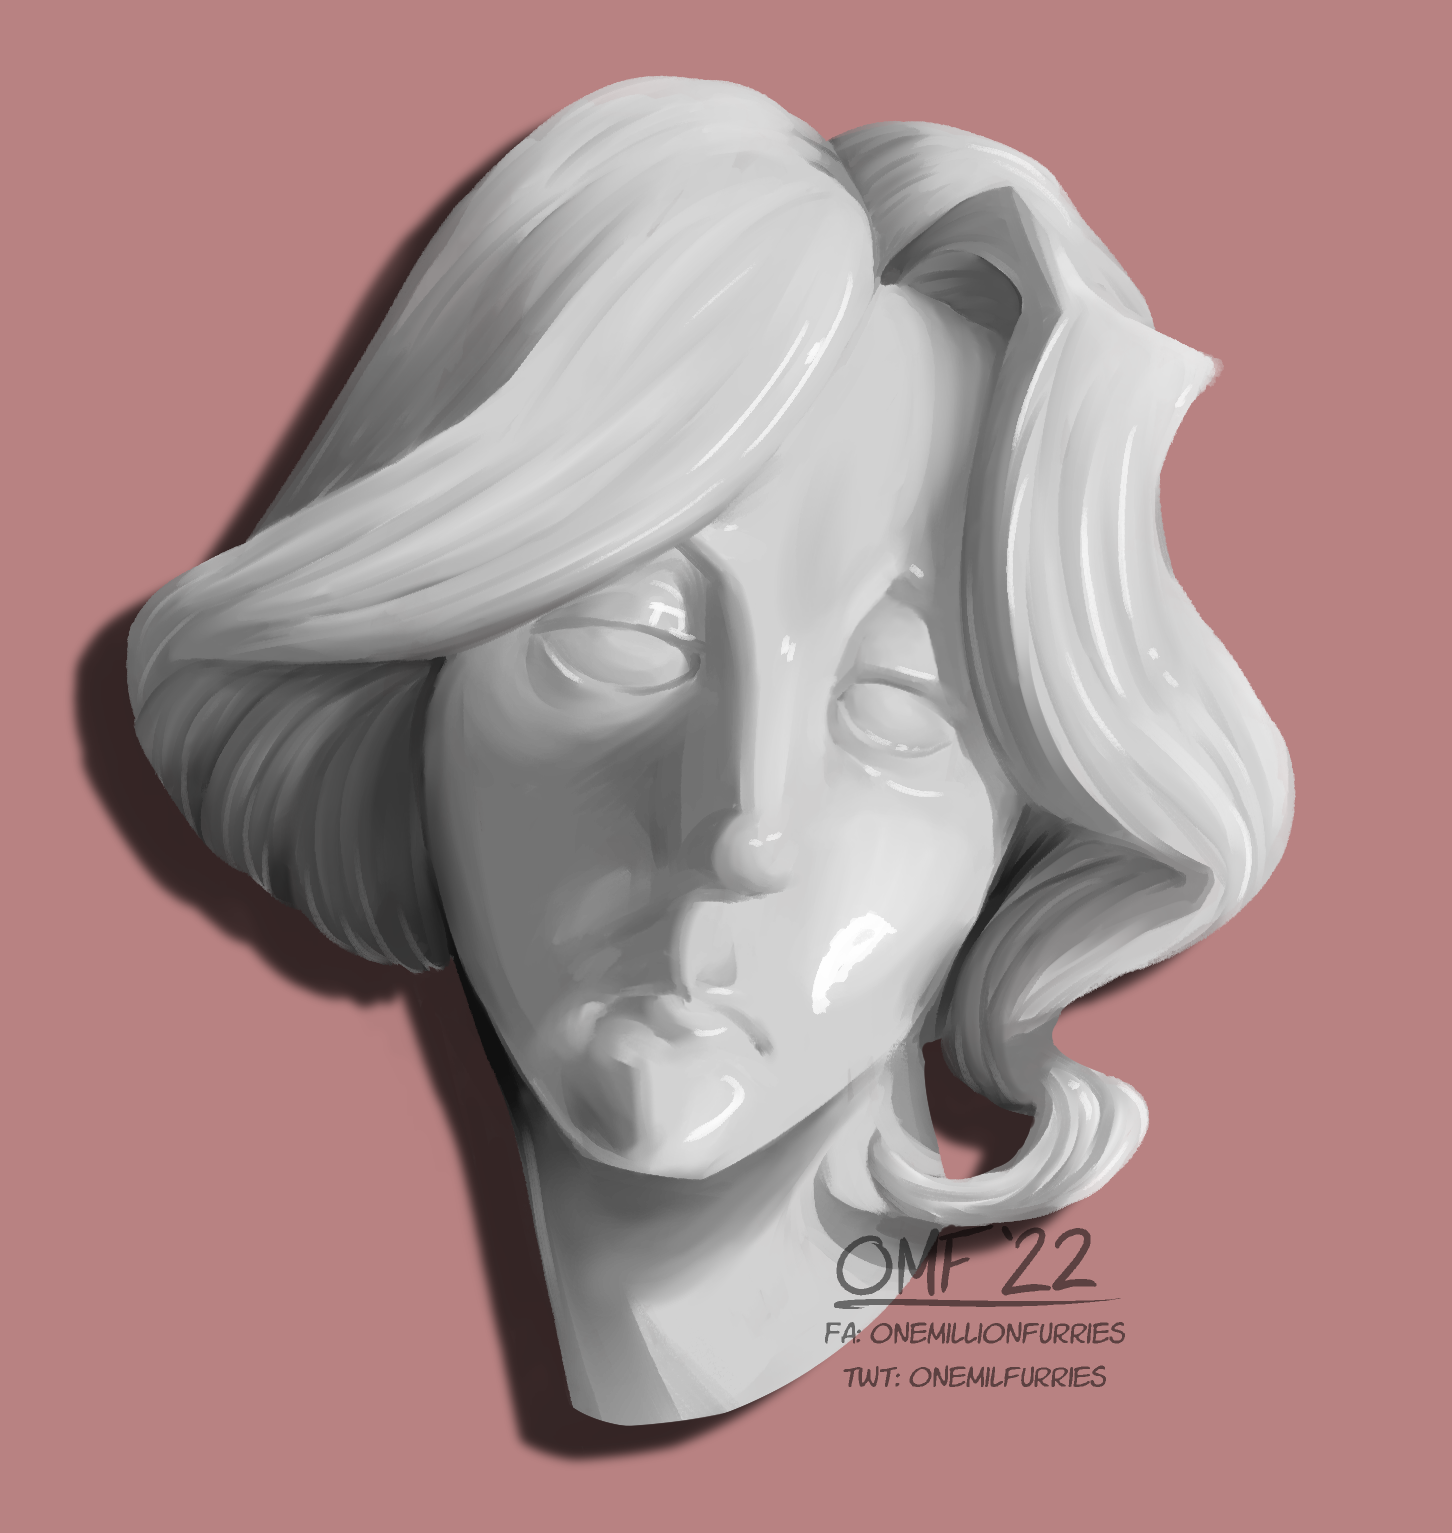 A drawing of a marble-like headshot on a desaturated red background. The subject has mid-length wavy hair and has a contempt expression on their face. The headshot is rendered semi-realistically, as if it were a piece of glossy marble or stone.